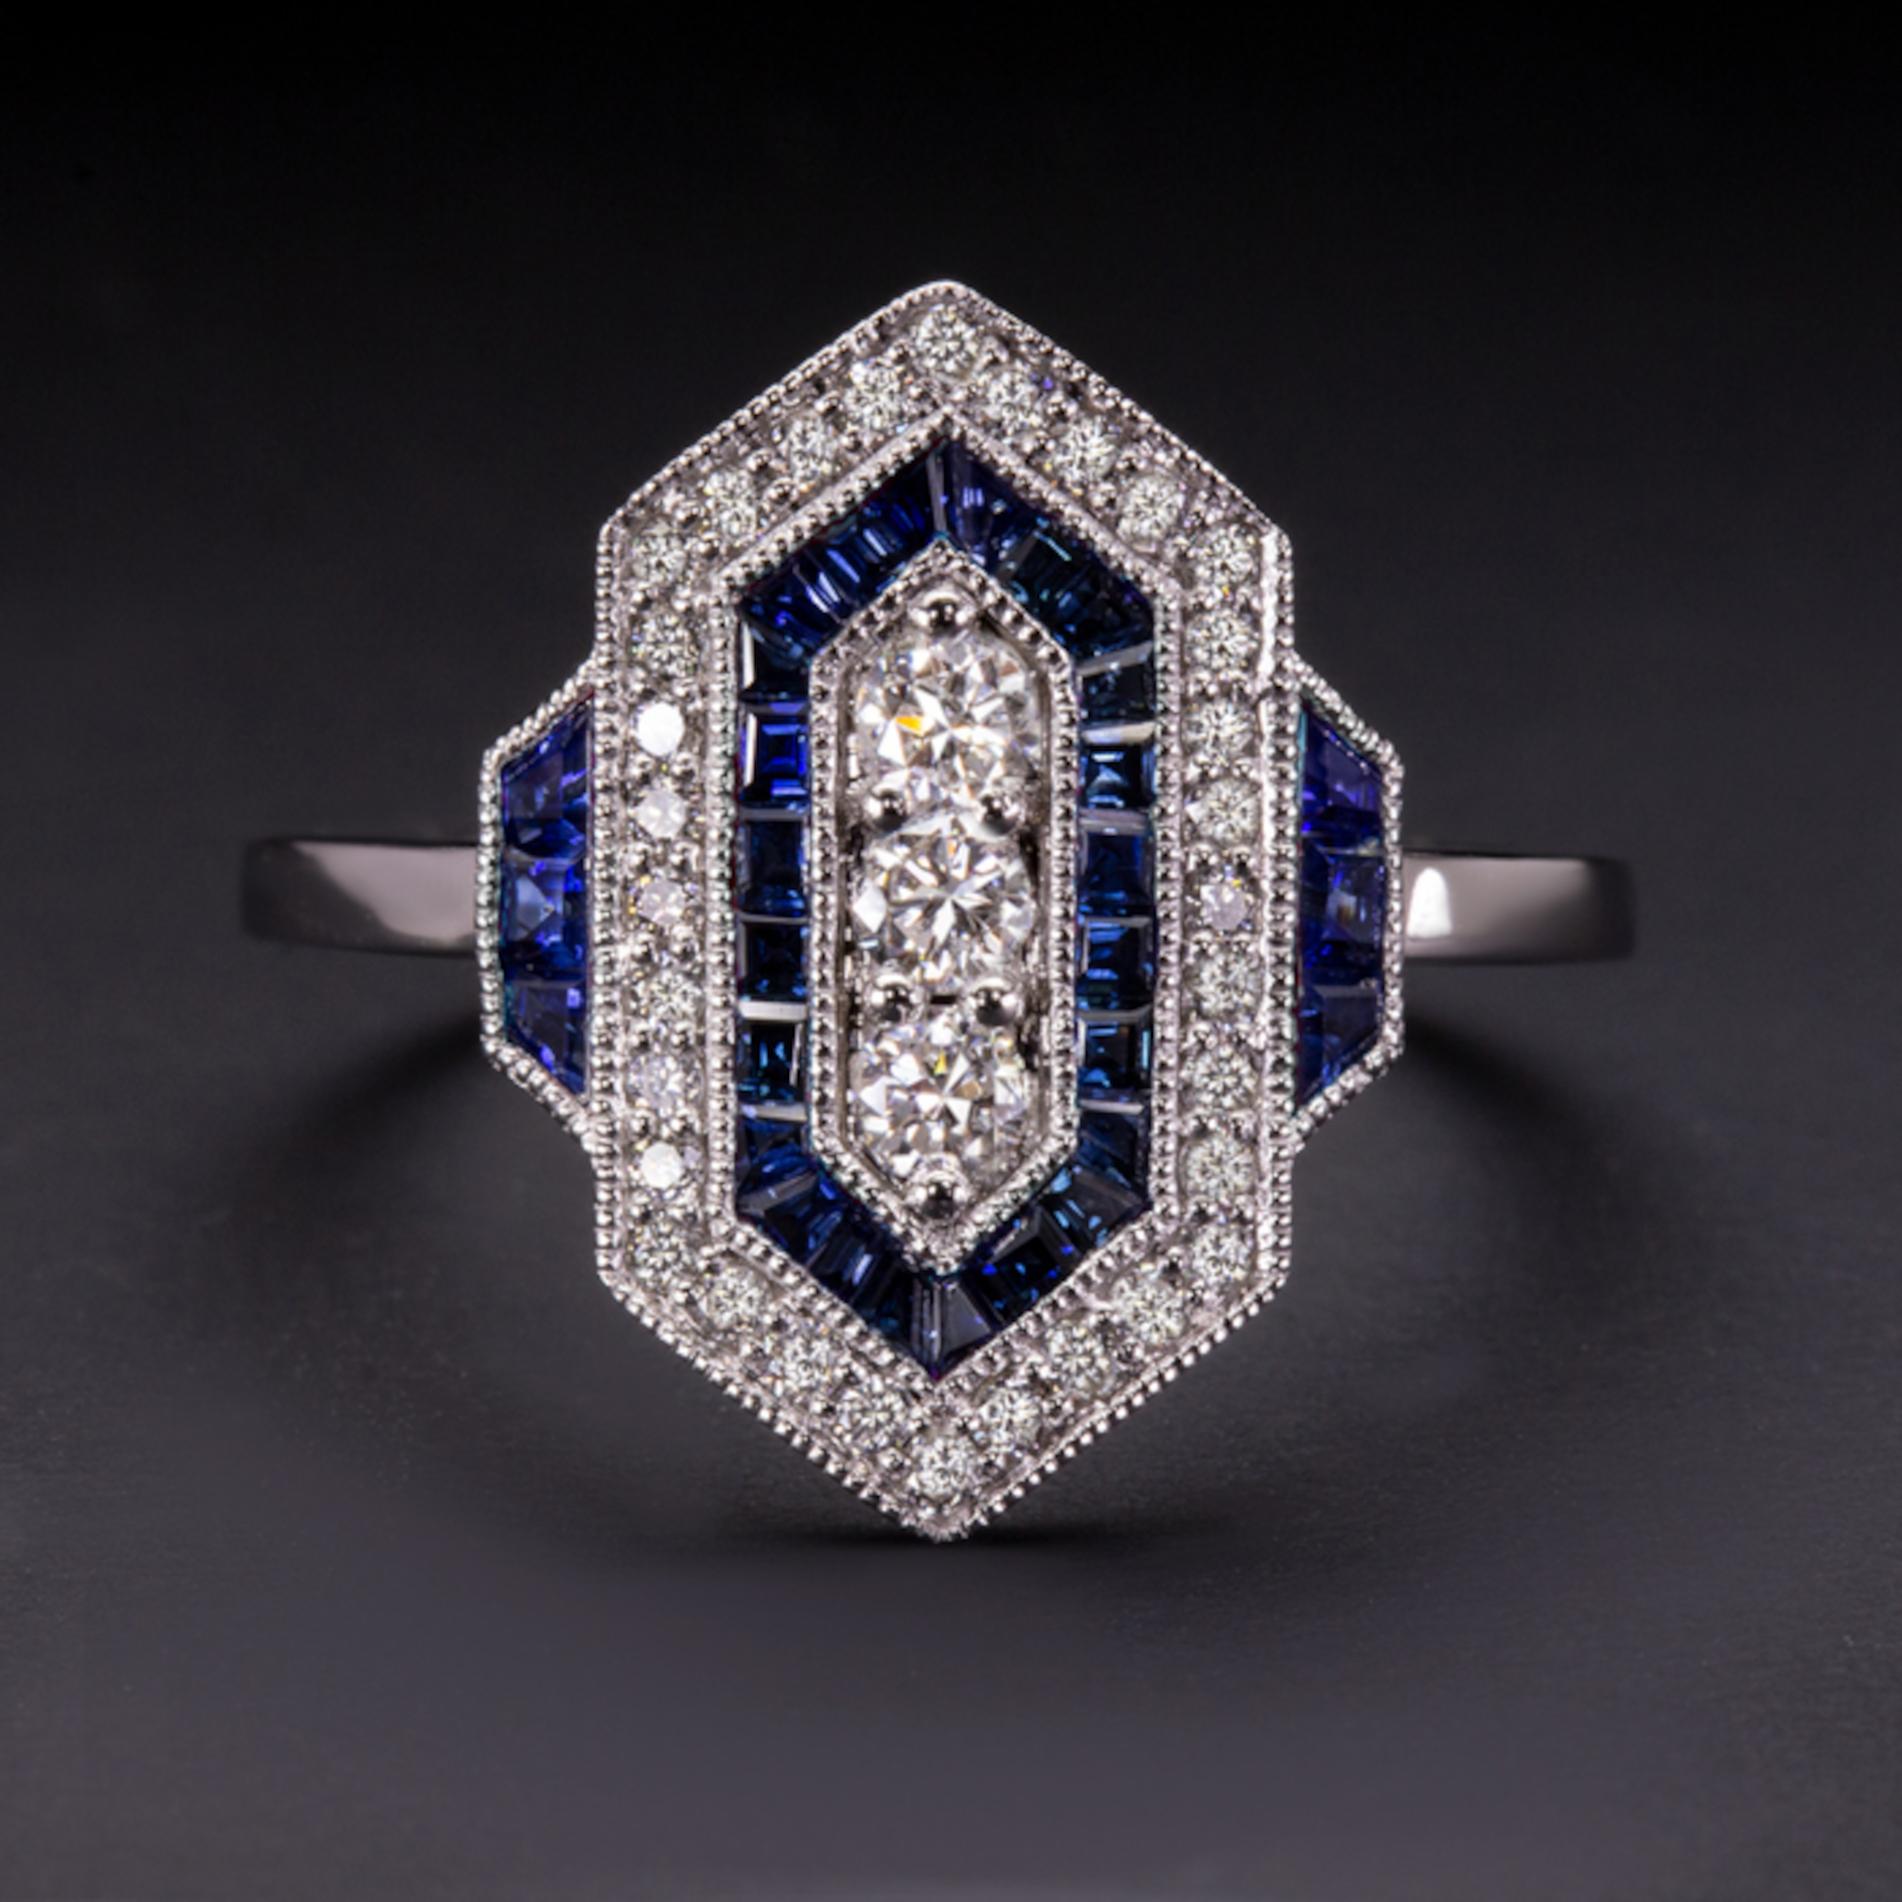 The chic geometric design glitters with vibrant diamonds and is punctuated by rich blue lines of meticulously custom cut sapphires. The effect is striking, gorgeously sophisticated, and eternally stylish! Whether you are buying for yourself or a